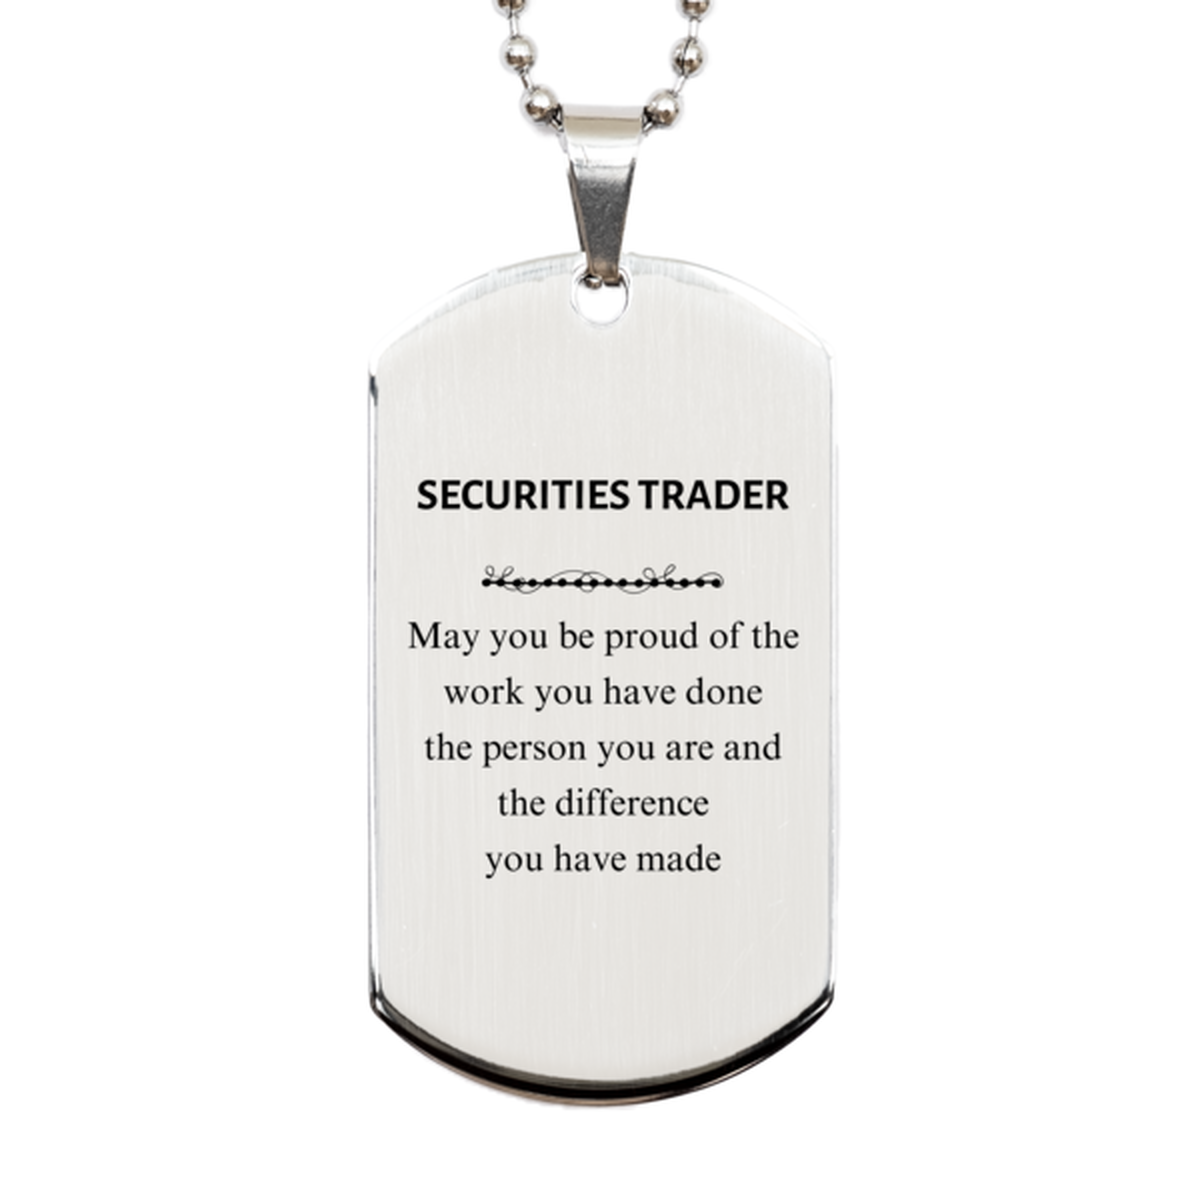 Securities Trader May you be proud of the work you have done, Retirement Securities Trader Silver Dog Tag for Colleague Appreciation Gifts Amazing for Securities Trader